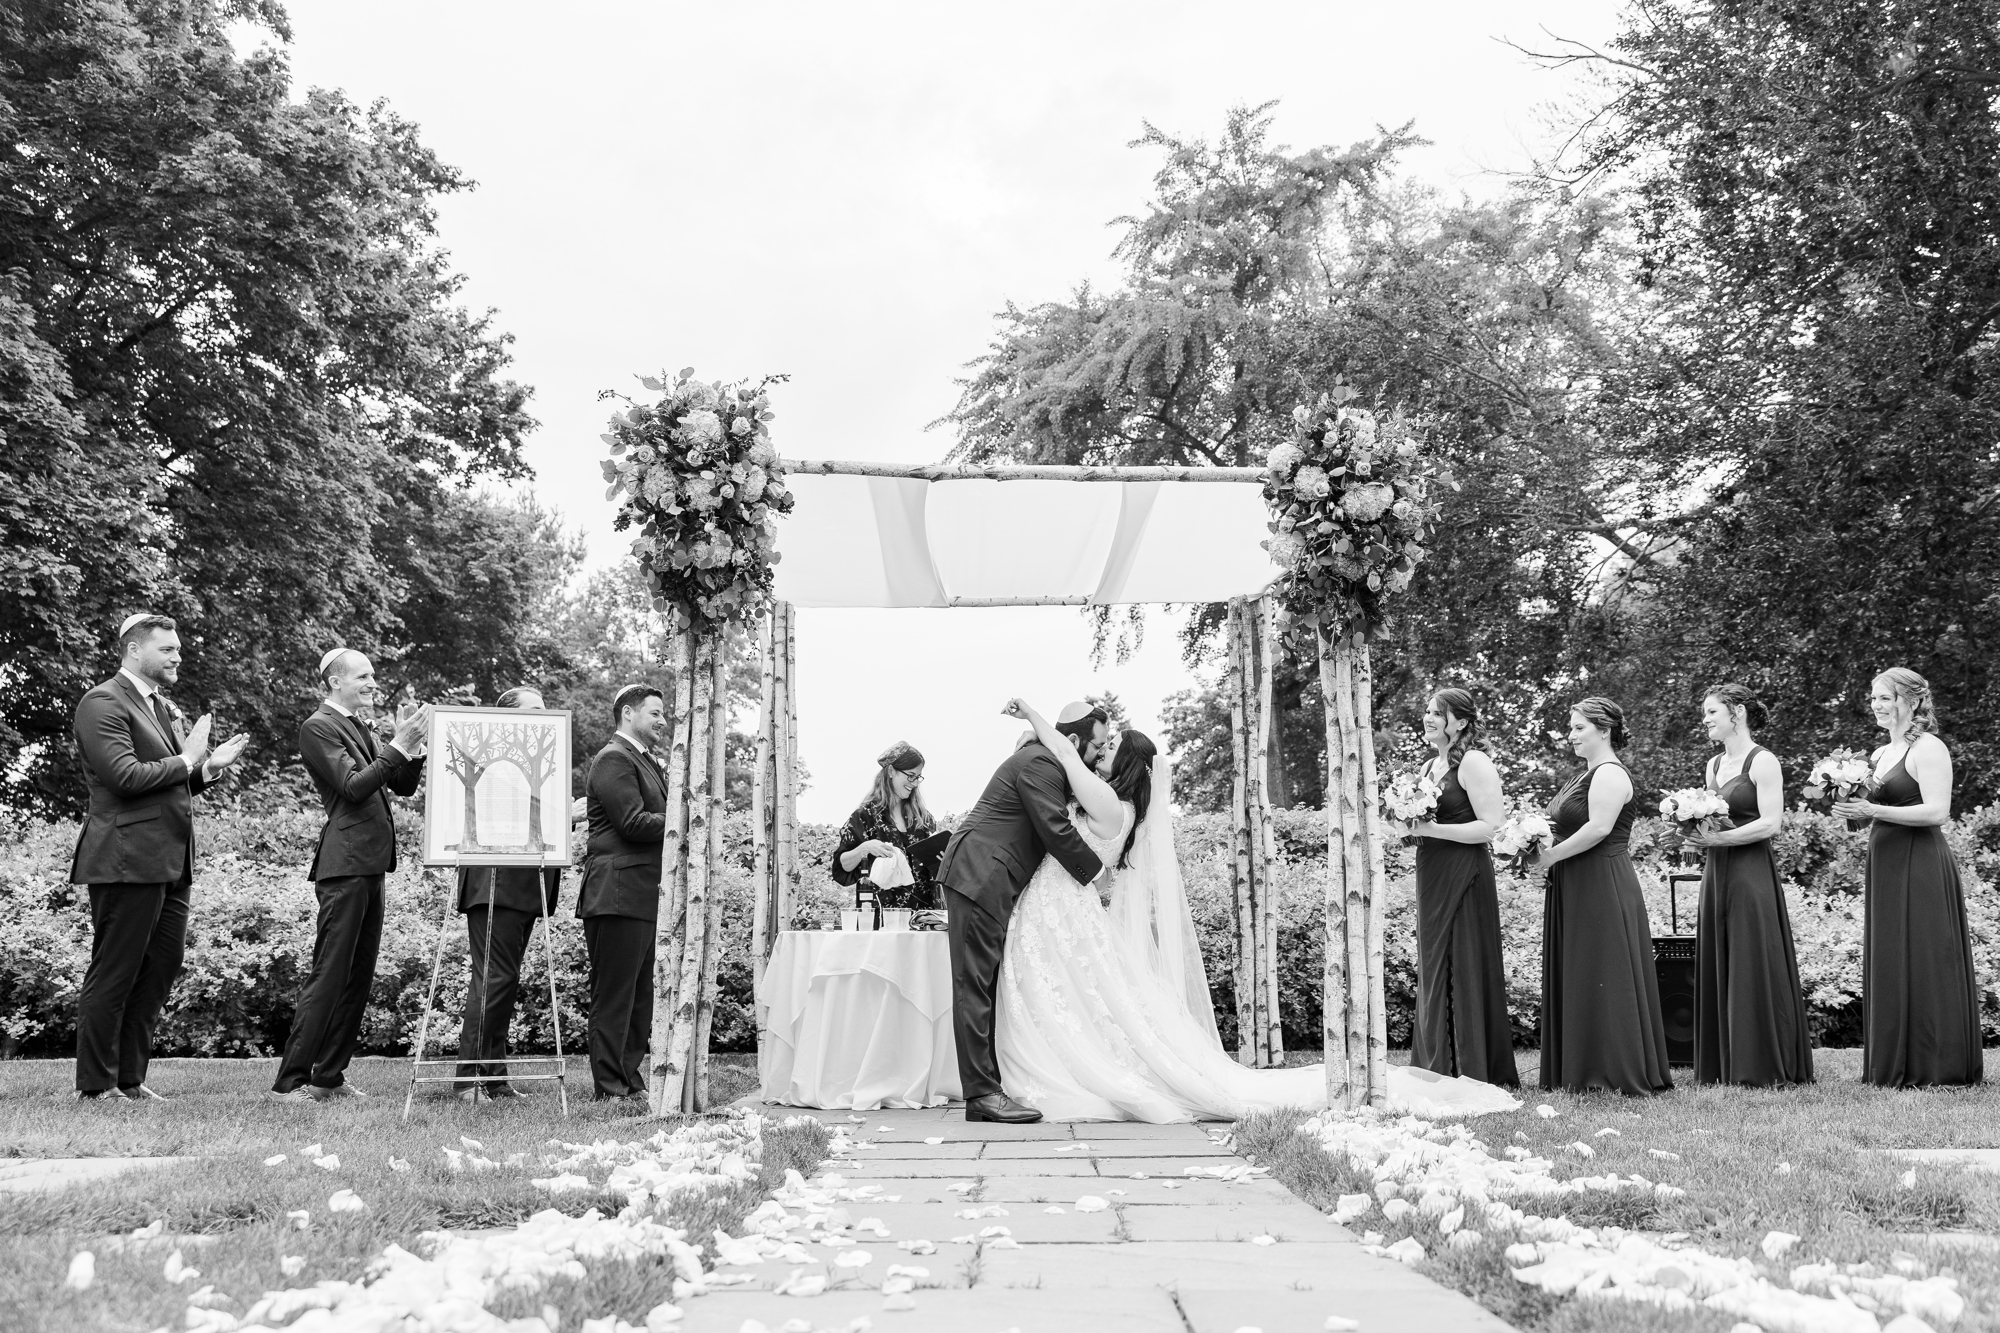 Playful Wedding at the Briarcliff Manor